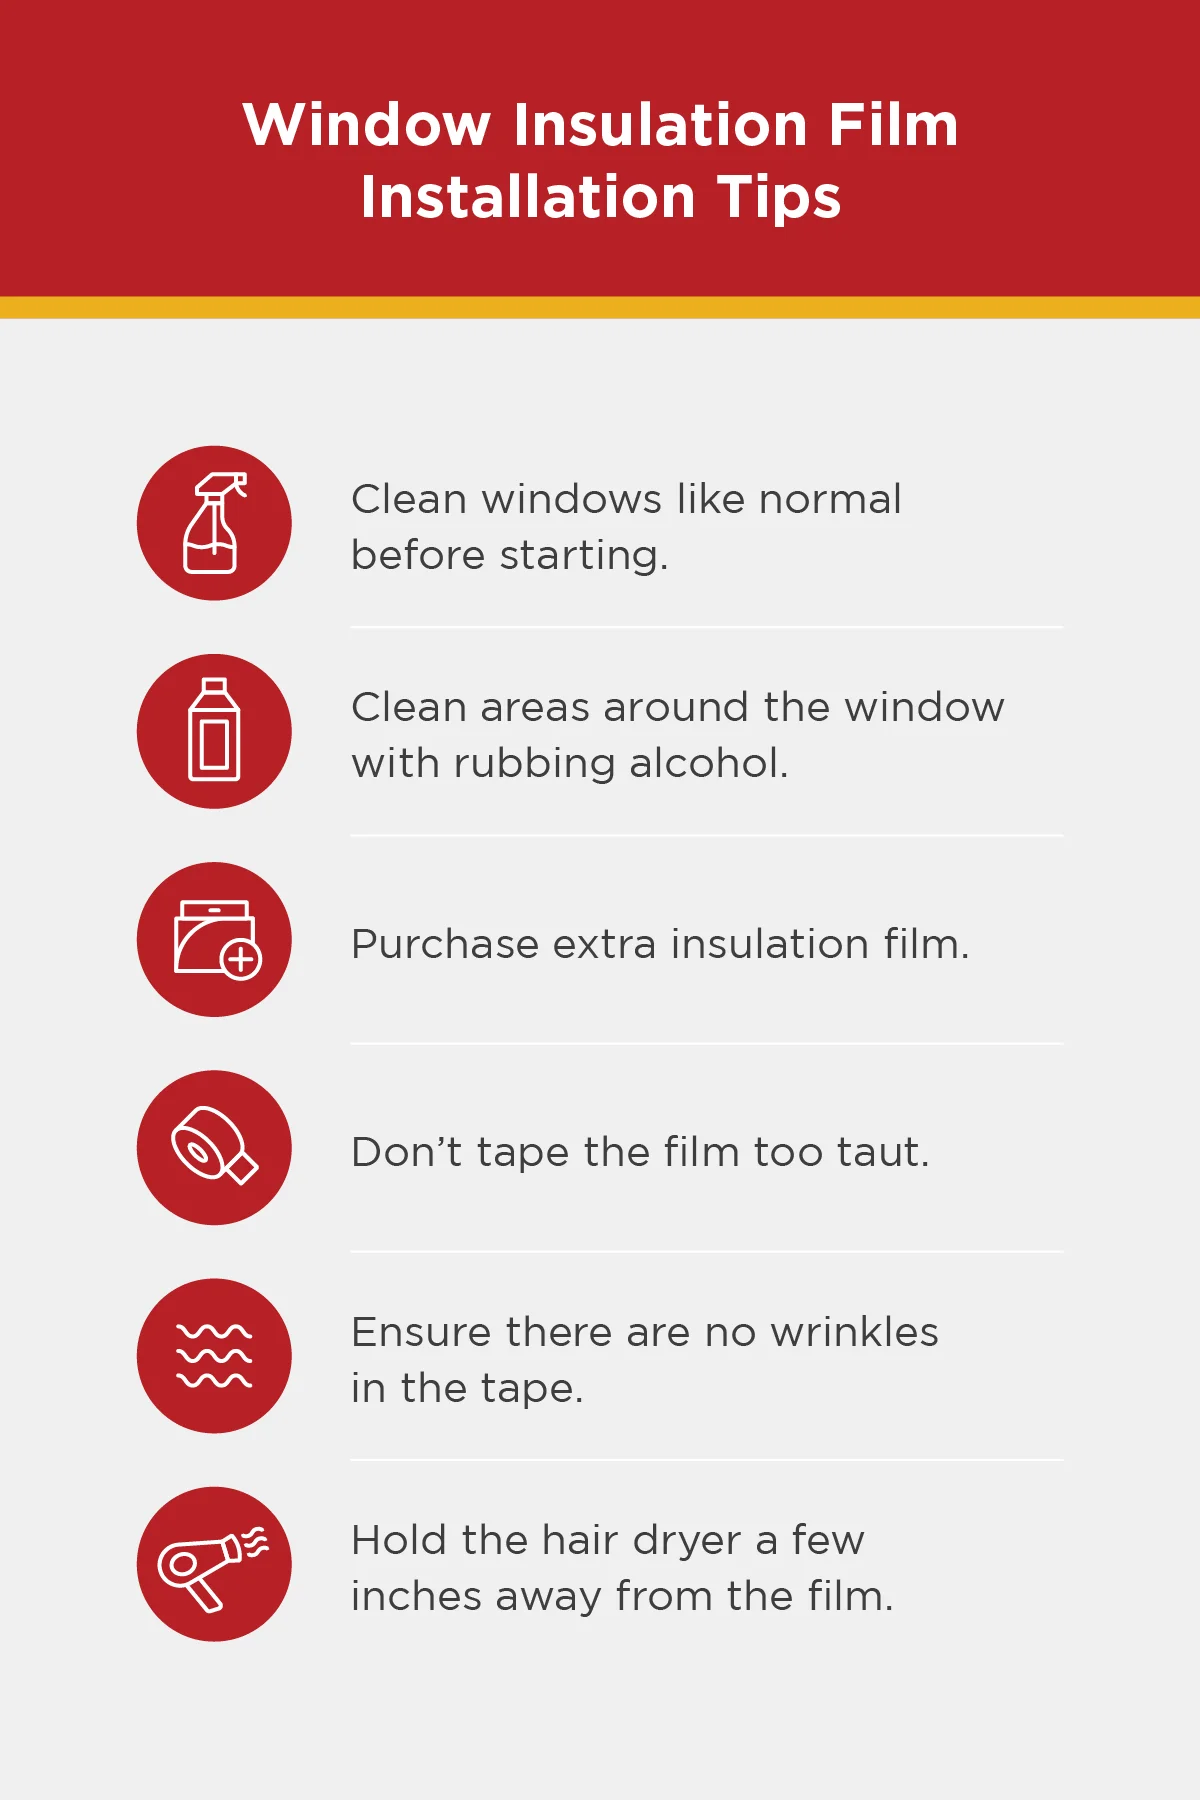 Image recounts our tips for proper window insulation kit installation.